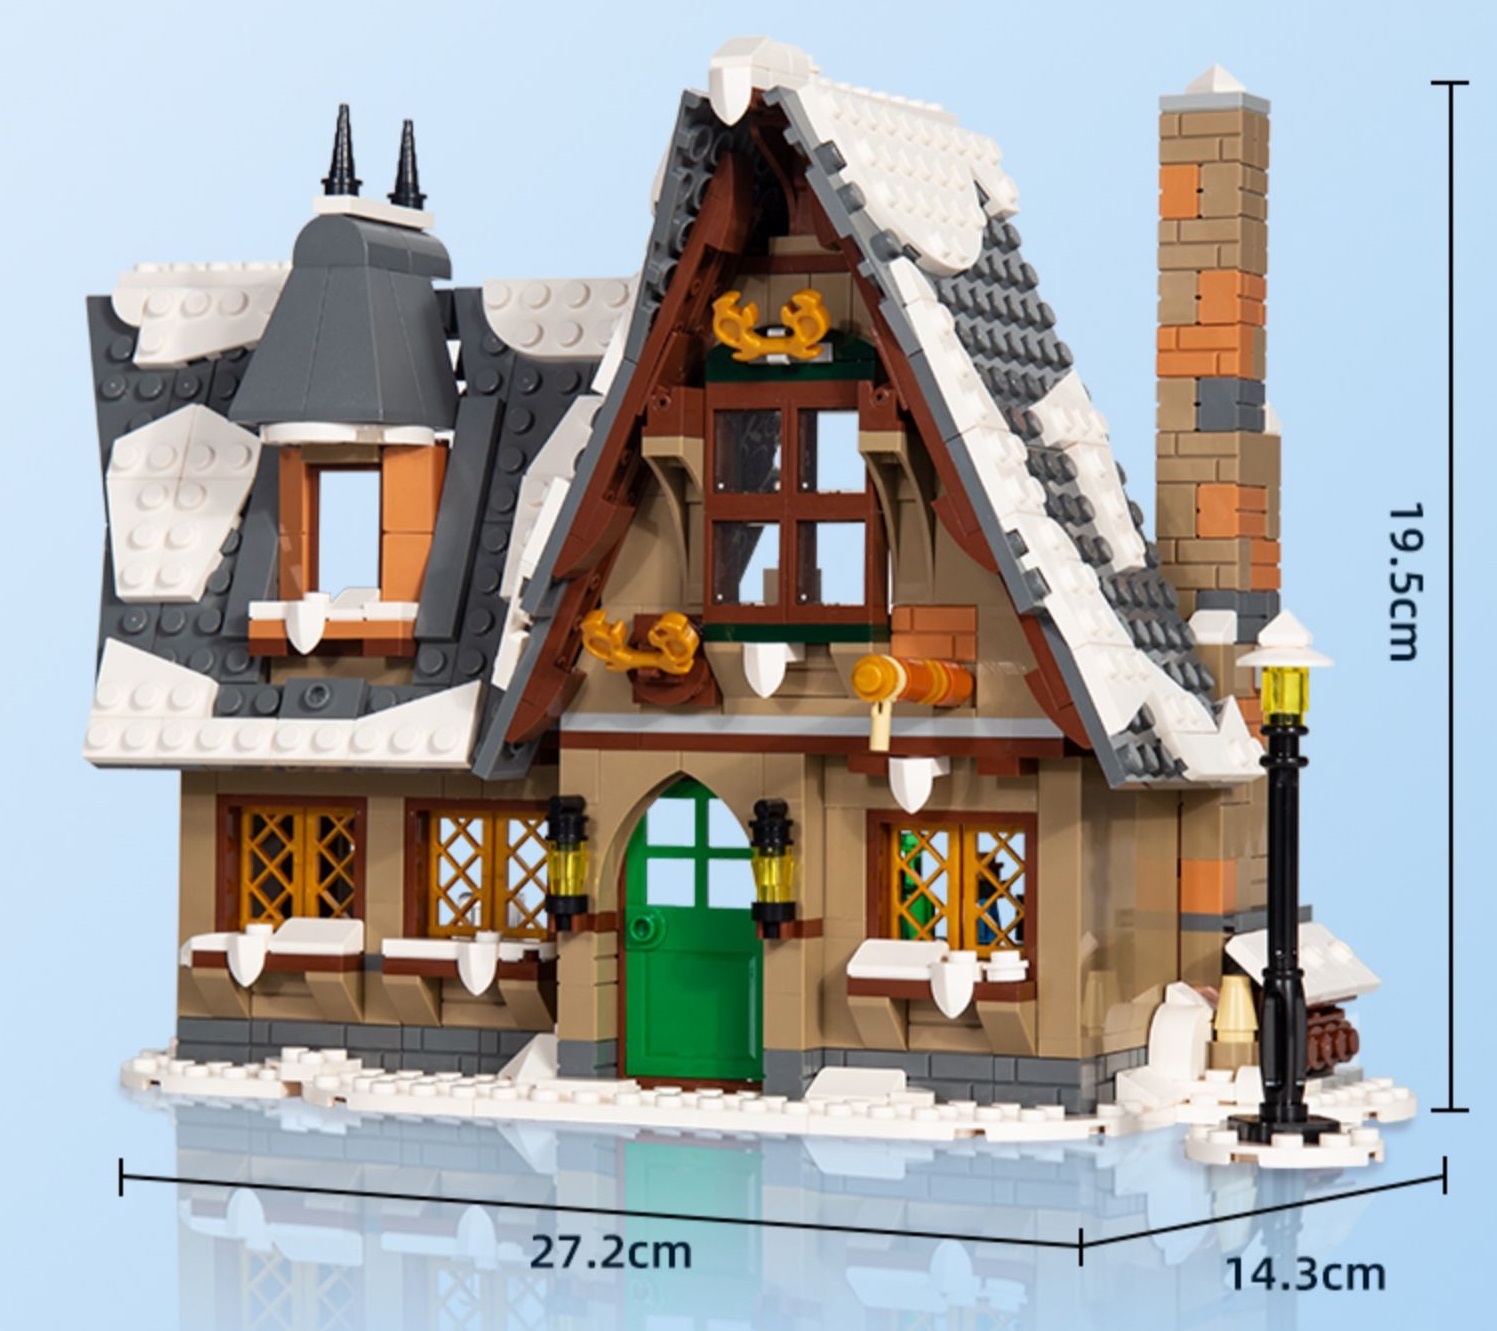 10267 Jingle Bells Creator Expert Christmas Cottage Building Block Set, Pretty Sweet Gingerbread House Building Toy, Best Gift